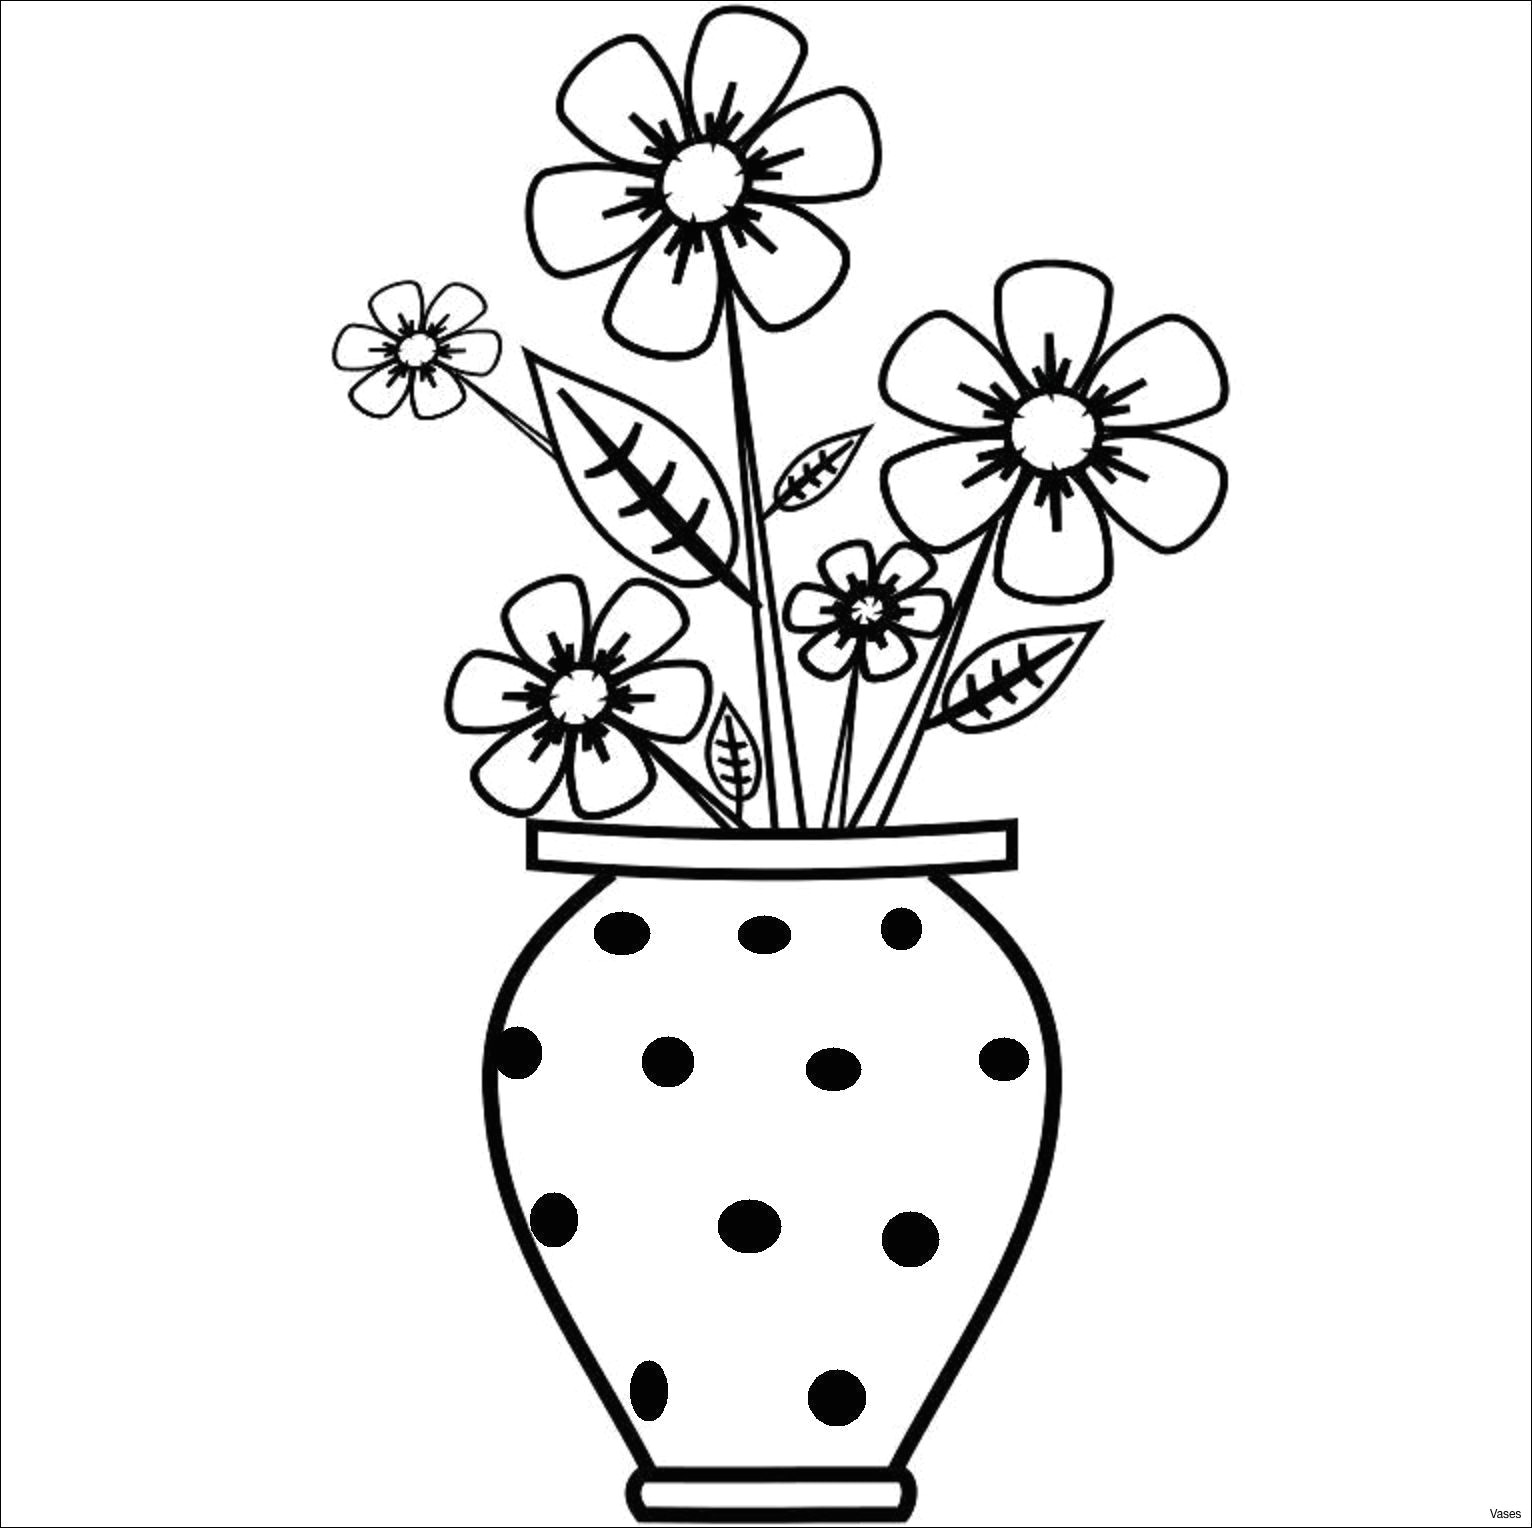 Easy Drawing and Colouring Images Of Easy Drawings Vase Art Drawings How to Draw A Vase Step 2h